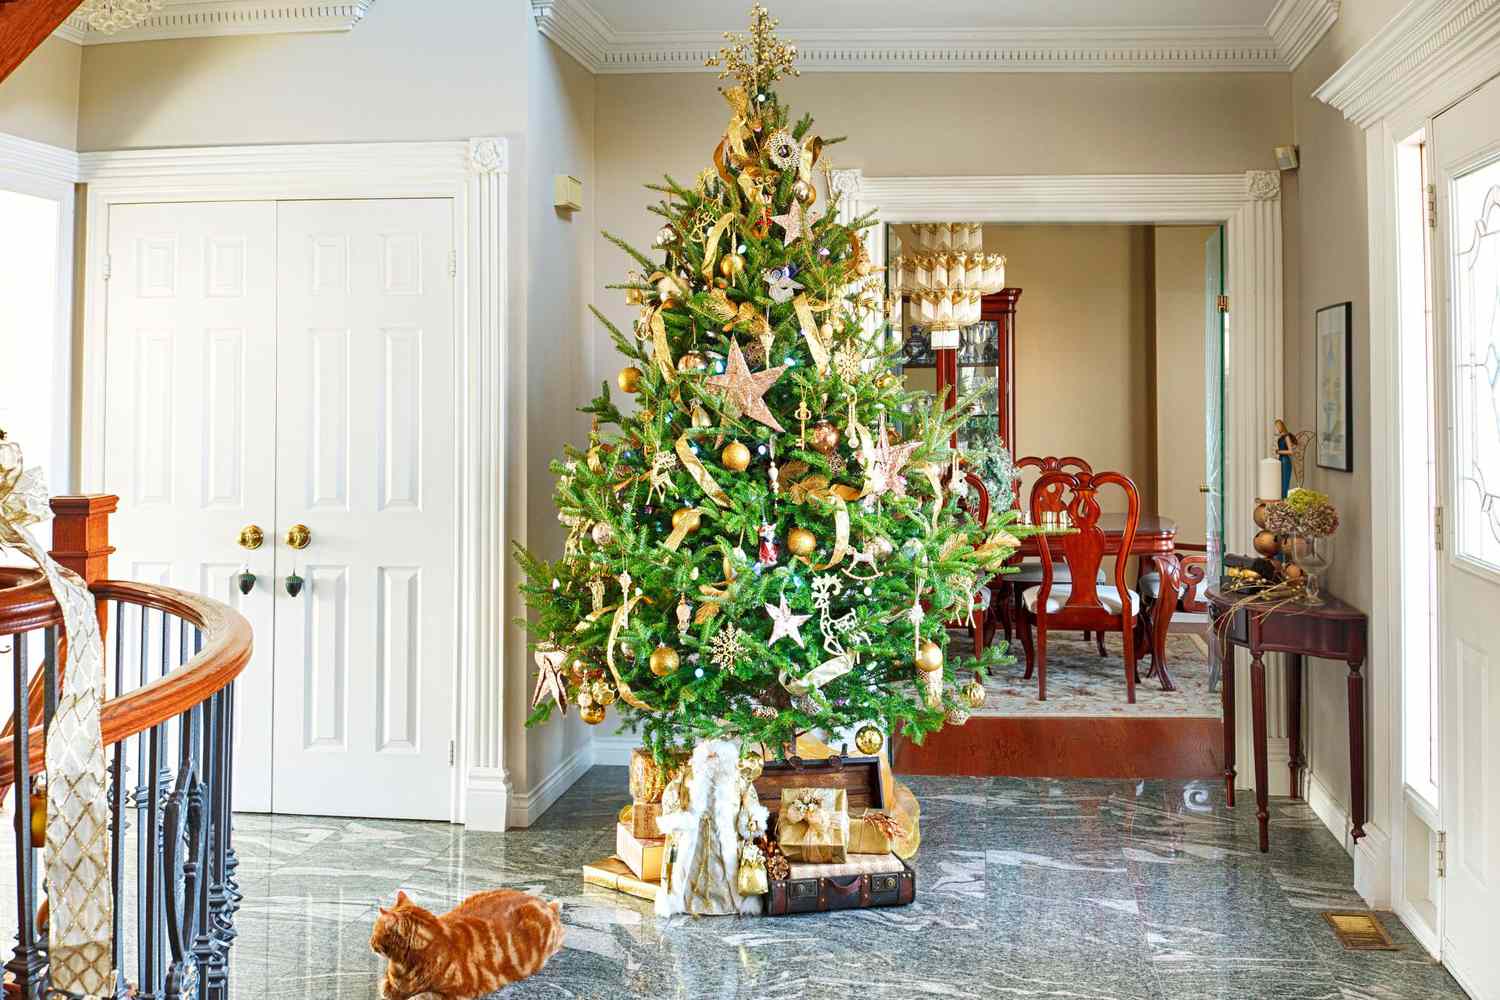 When Should You Buy A Live Christmas Tree?